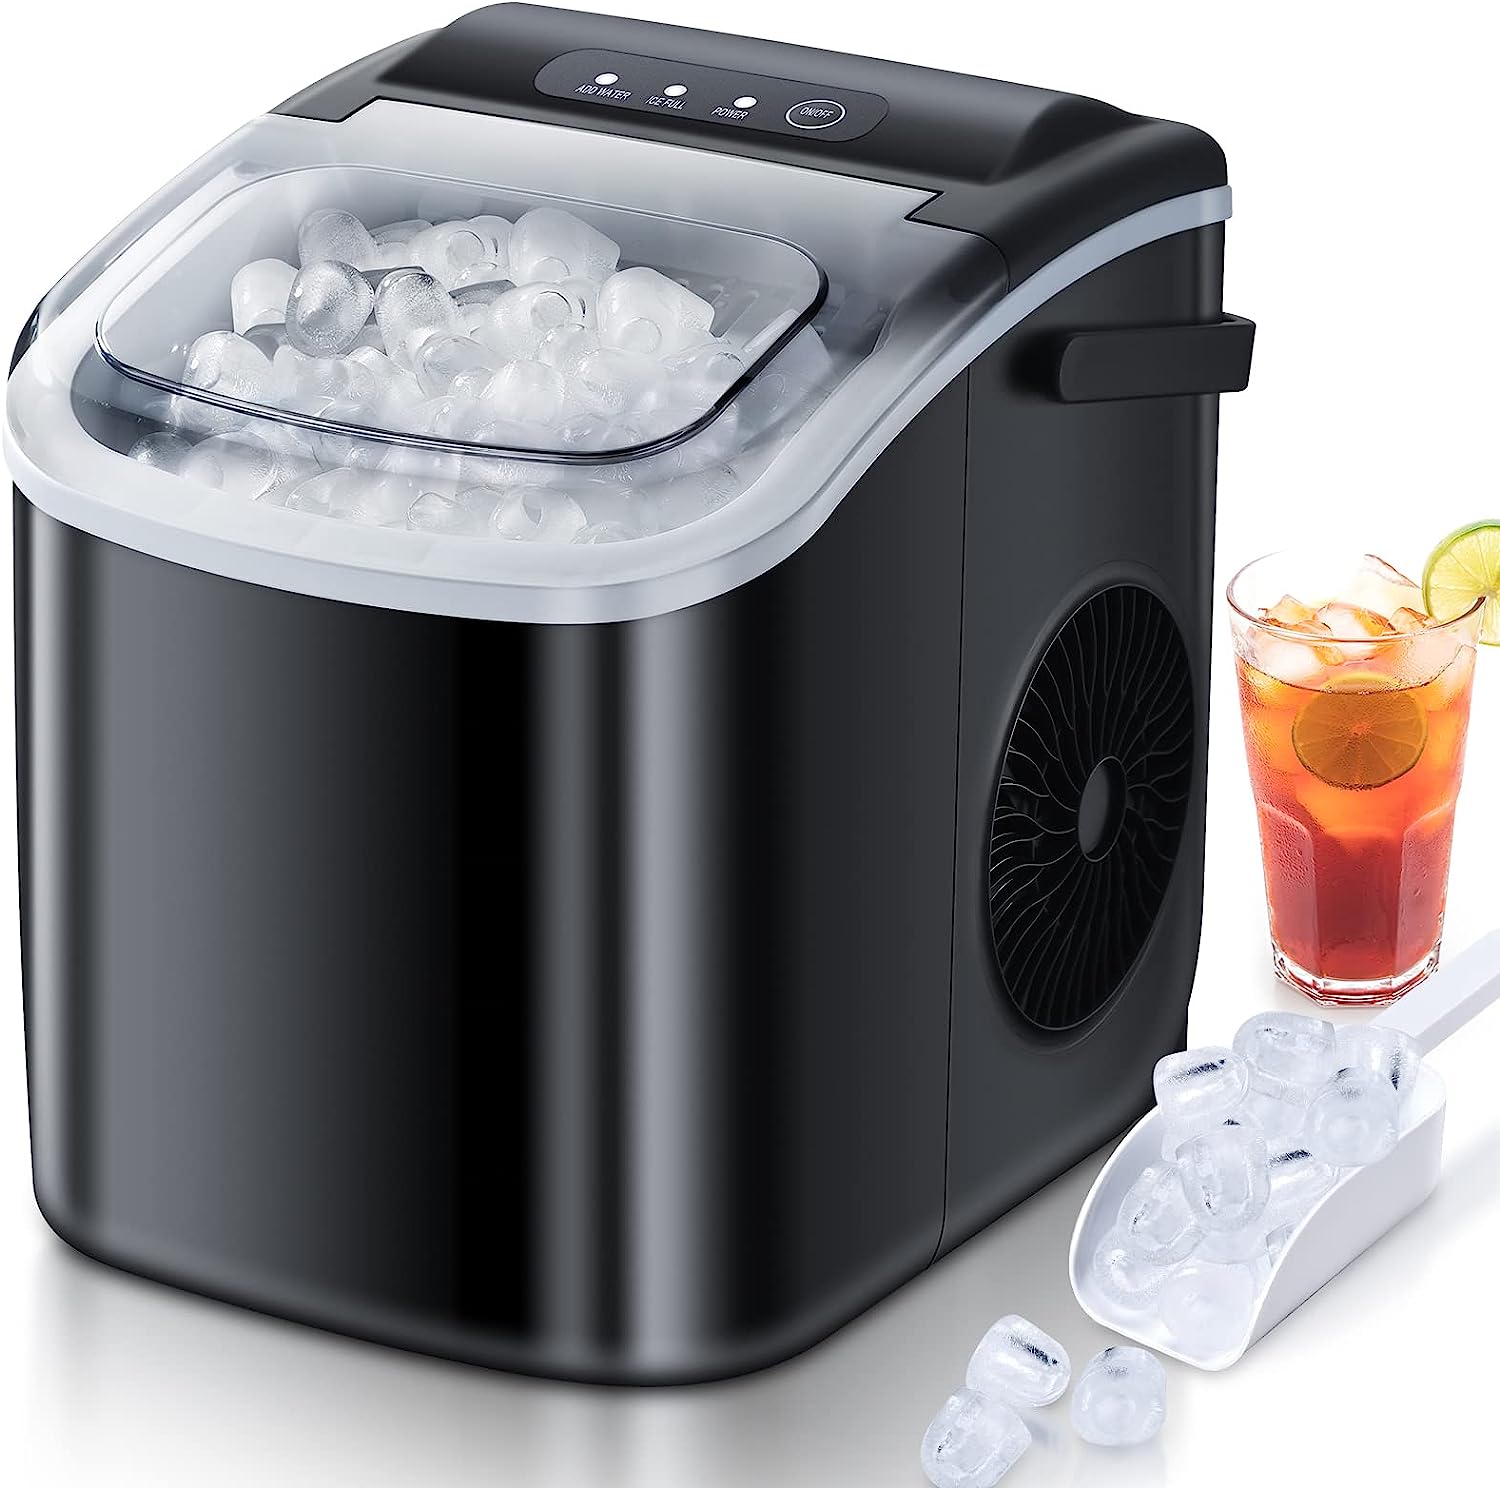 Countertop Ice Maker Review